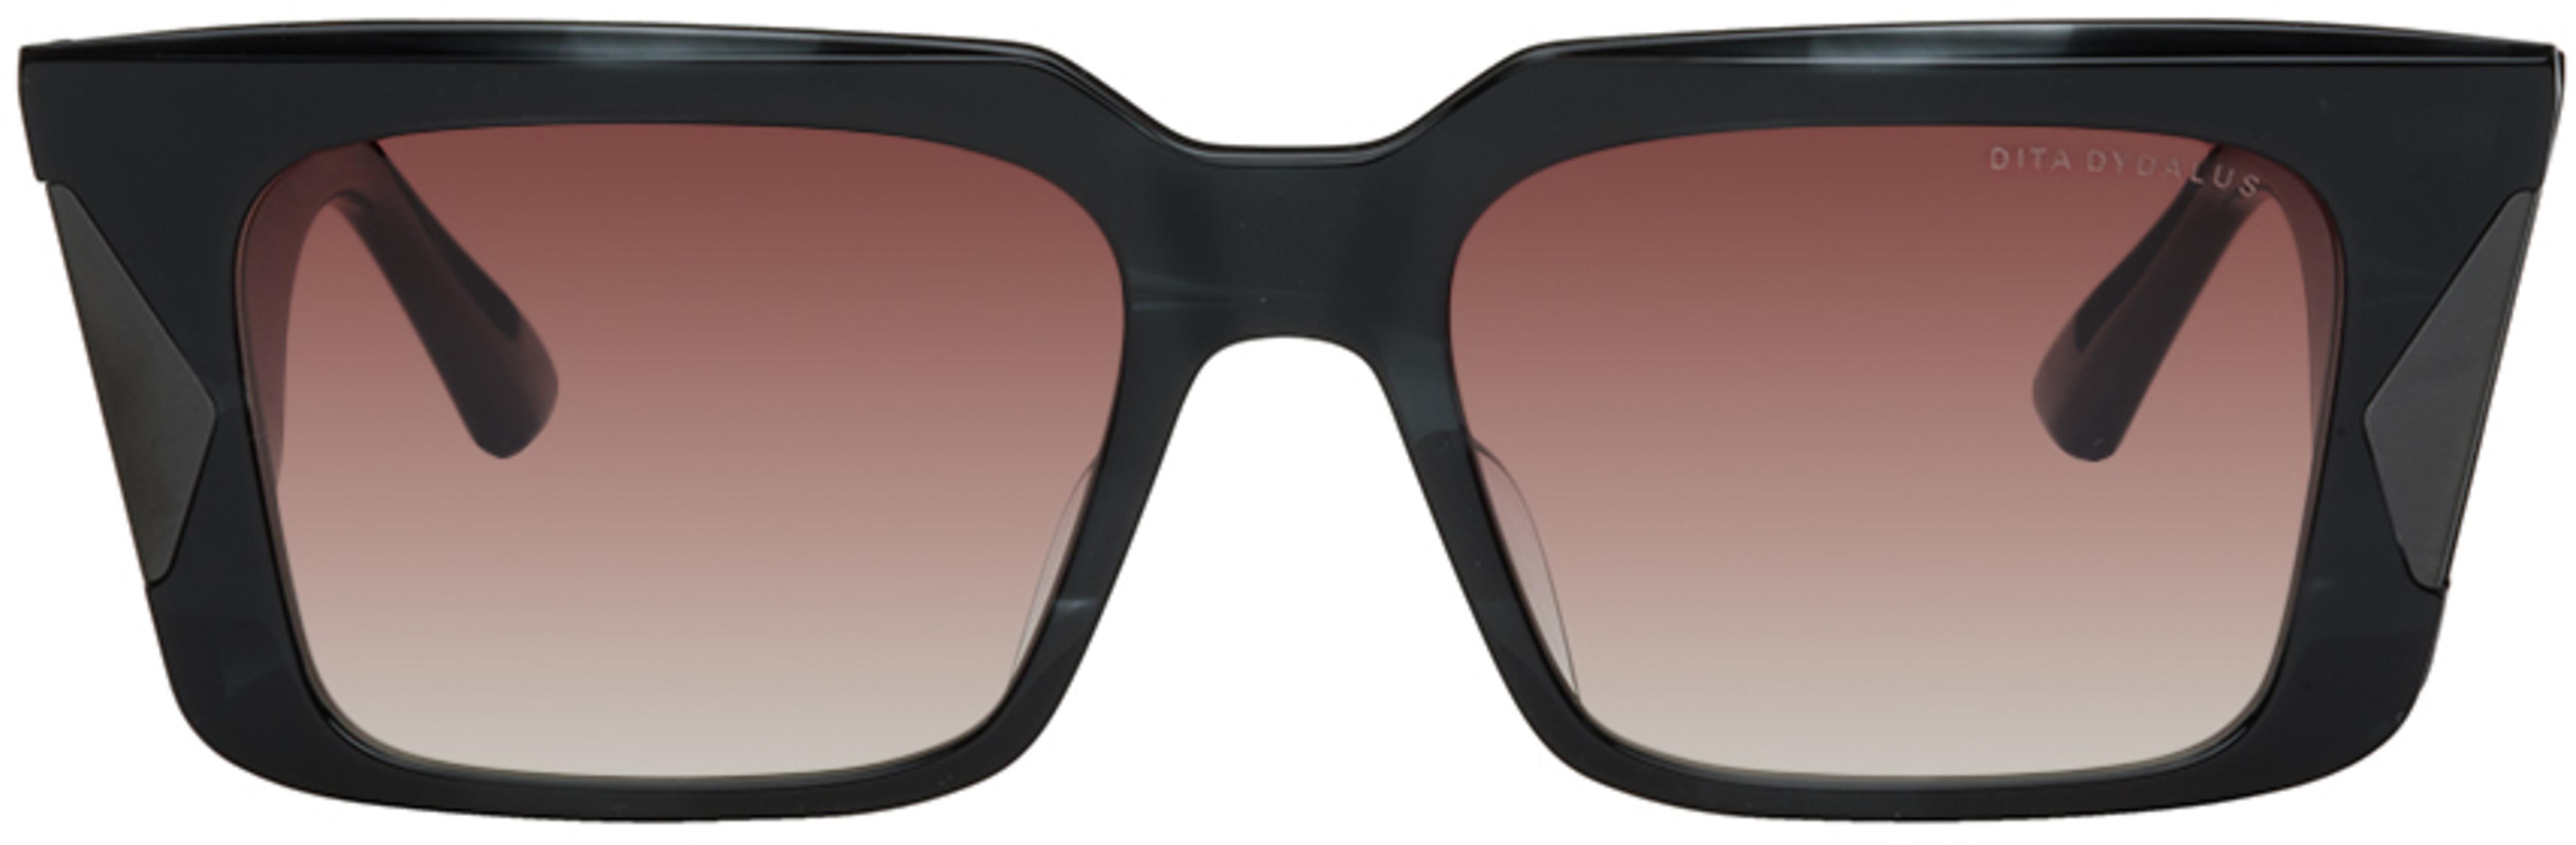 Black Limited Edition Dydalus Sunglasses by DITA